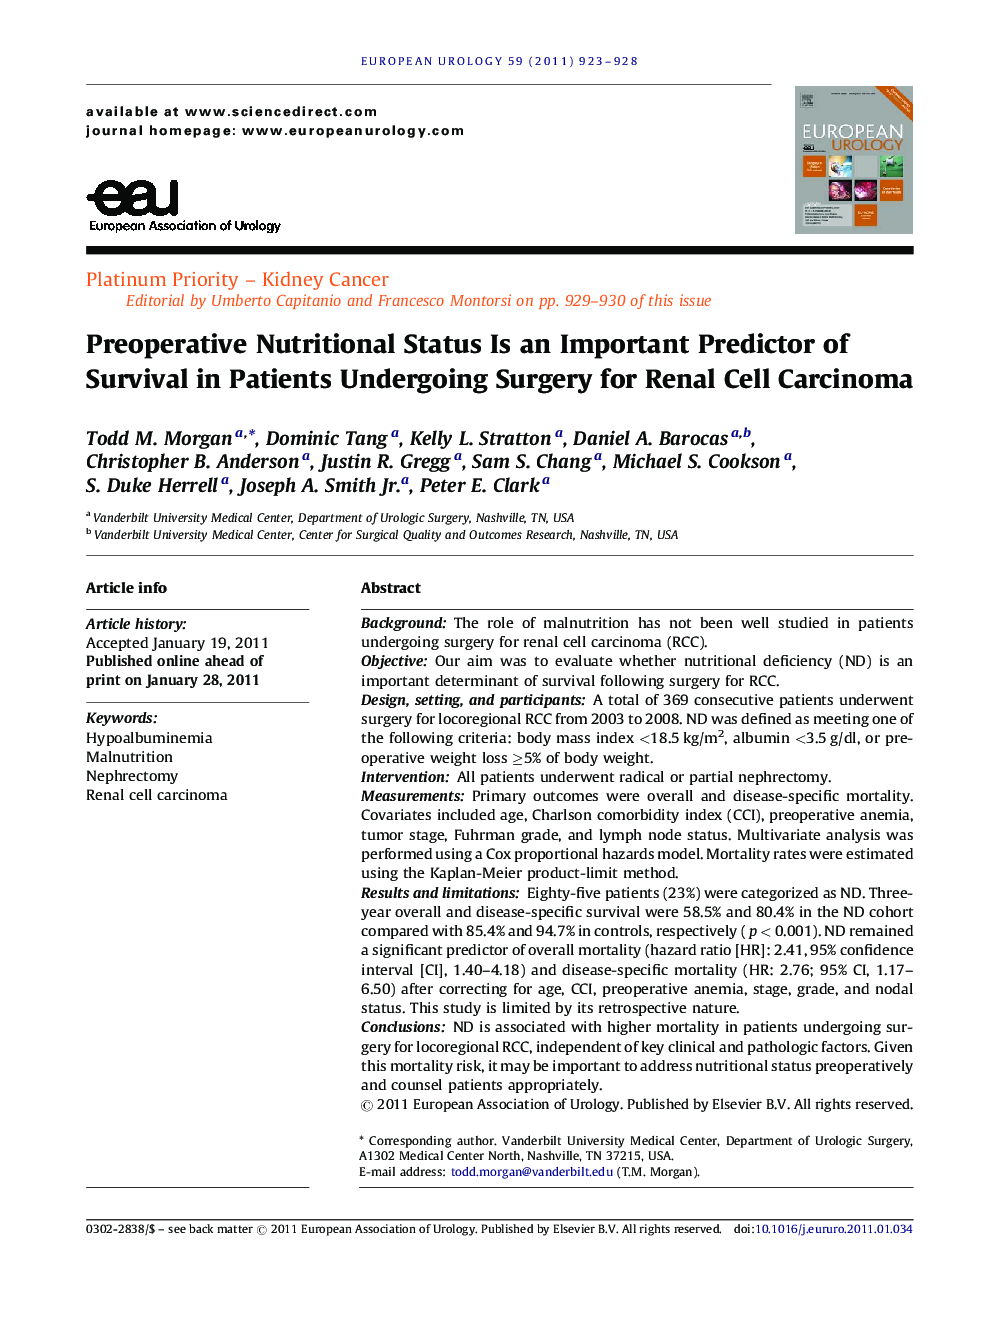 Preoperative Nutritional Status Is an Important Predictor of Survival in Patients Undergoing Surgery for Renal Cell Carcinoma